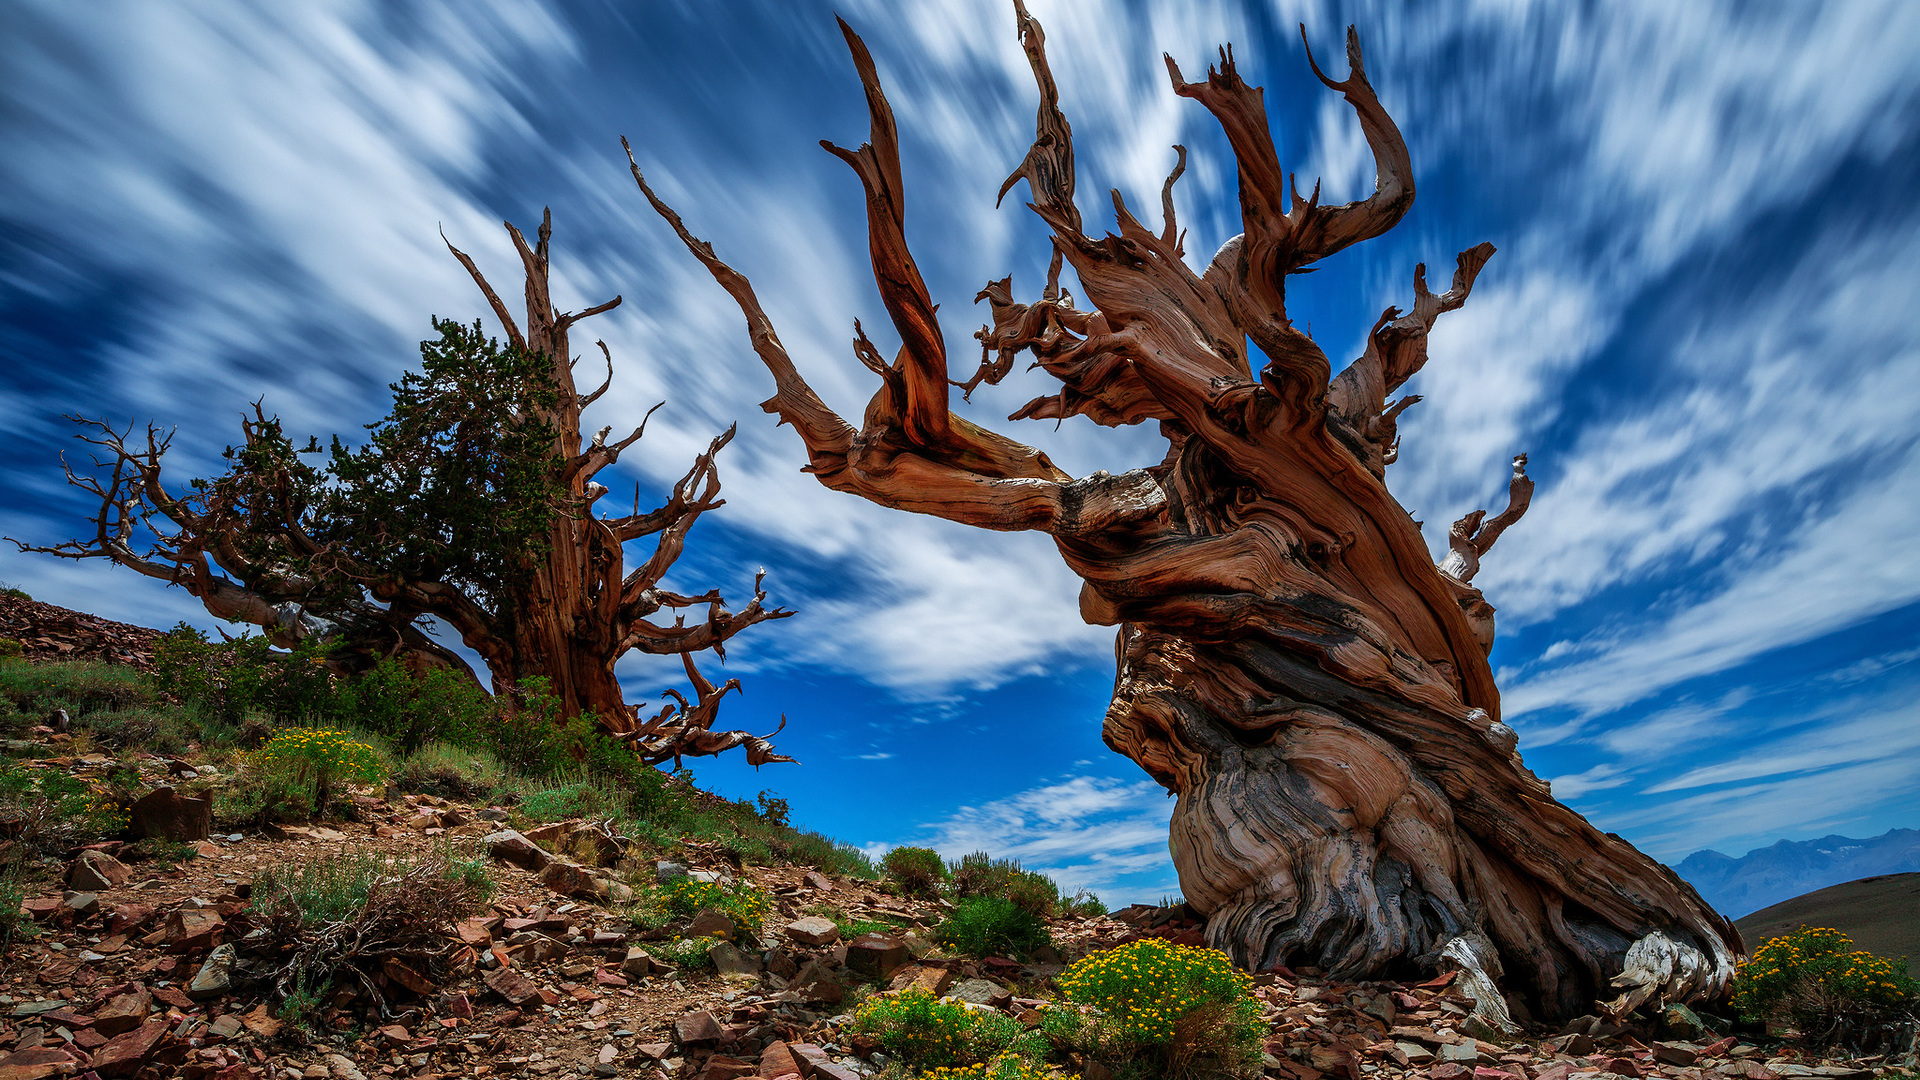 Usa, Ancient Bristlecone Pine Forest, Tree, Nature, - Ancient Bristlecone Pine Forest - HD Wallpaper 